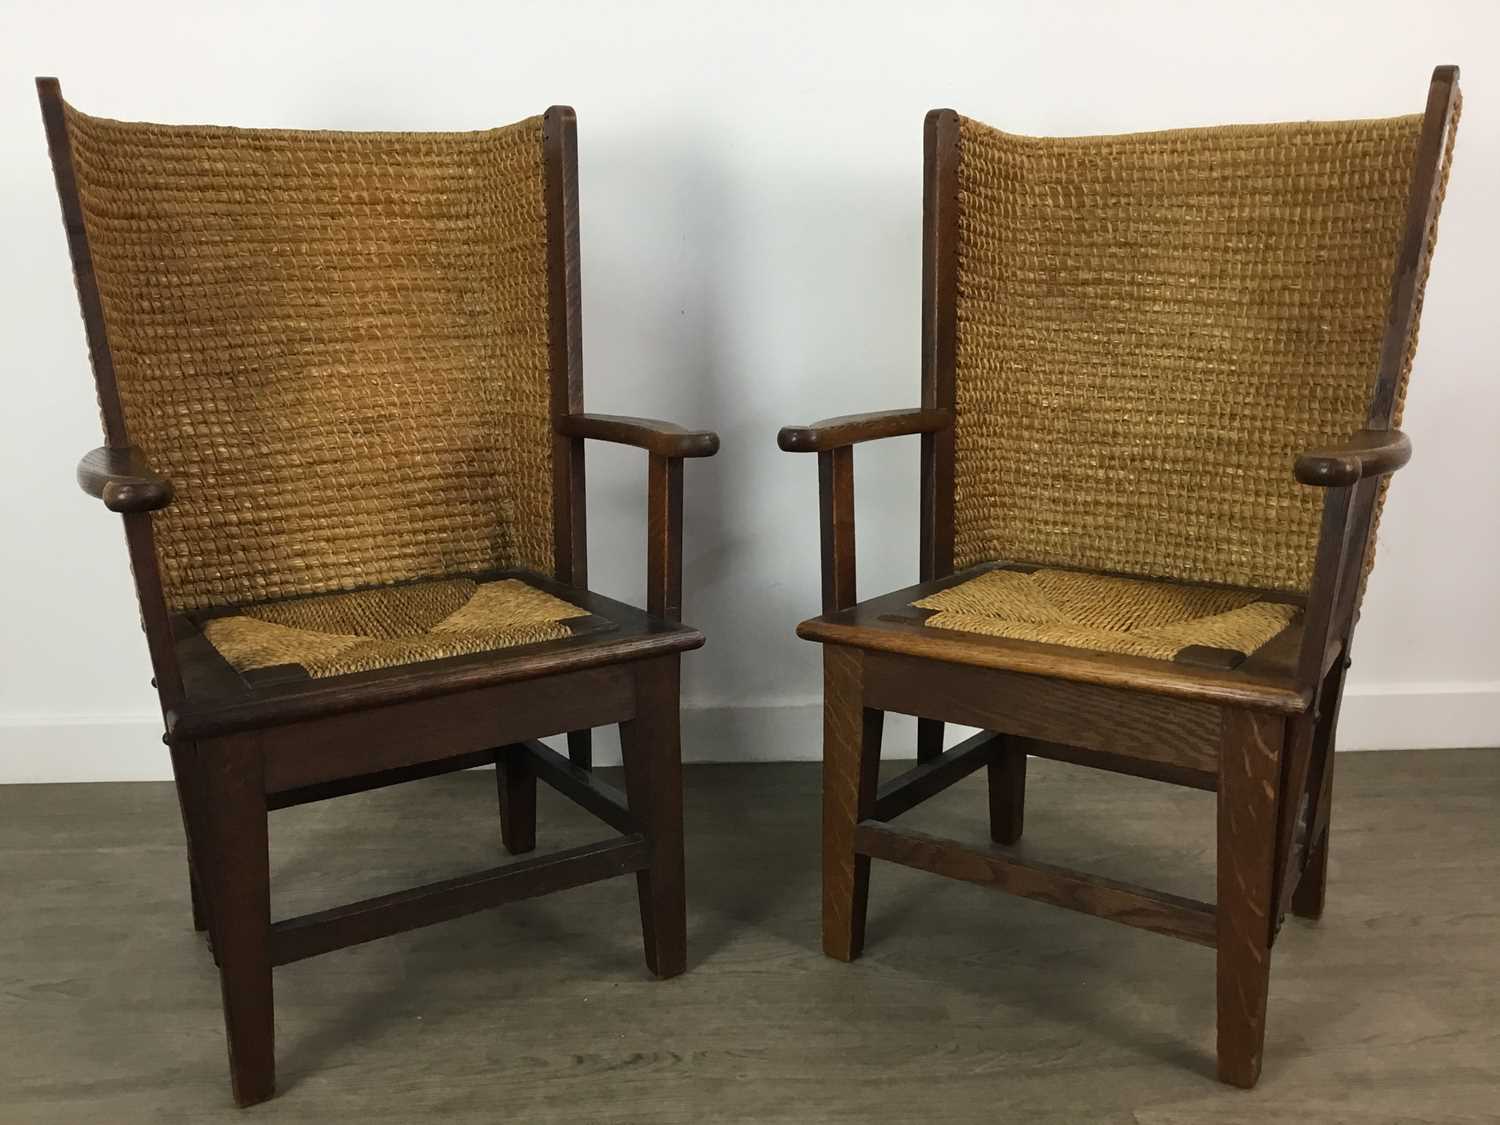 PAIR OF OAK ORKNEY CHAIRS, EARLY 20TH CENTURY - Image 2 of 18